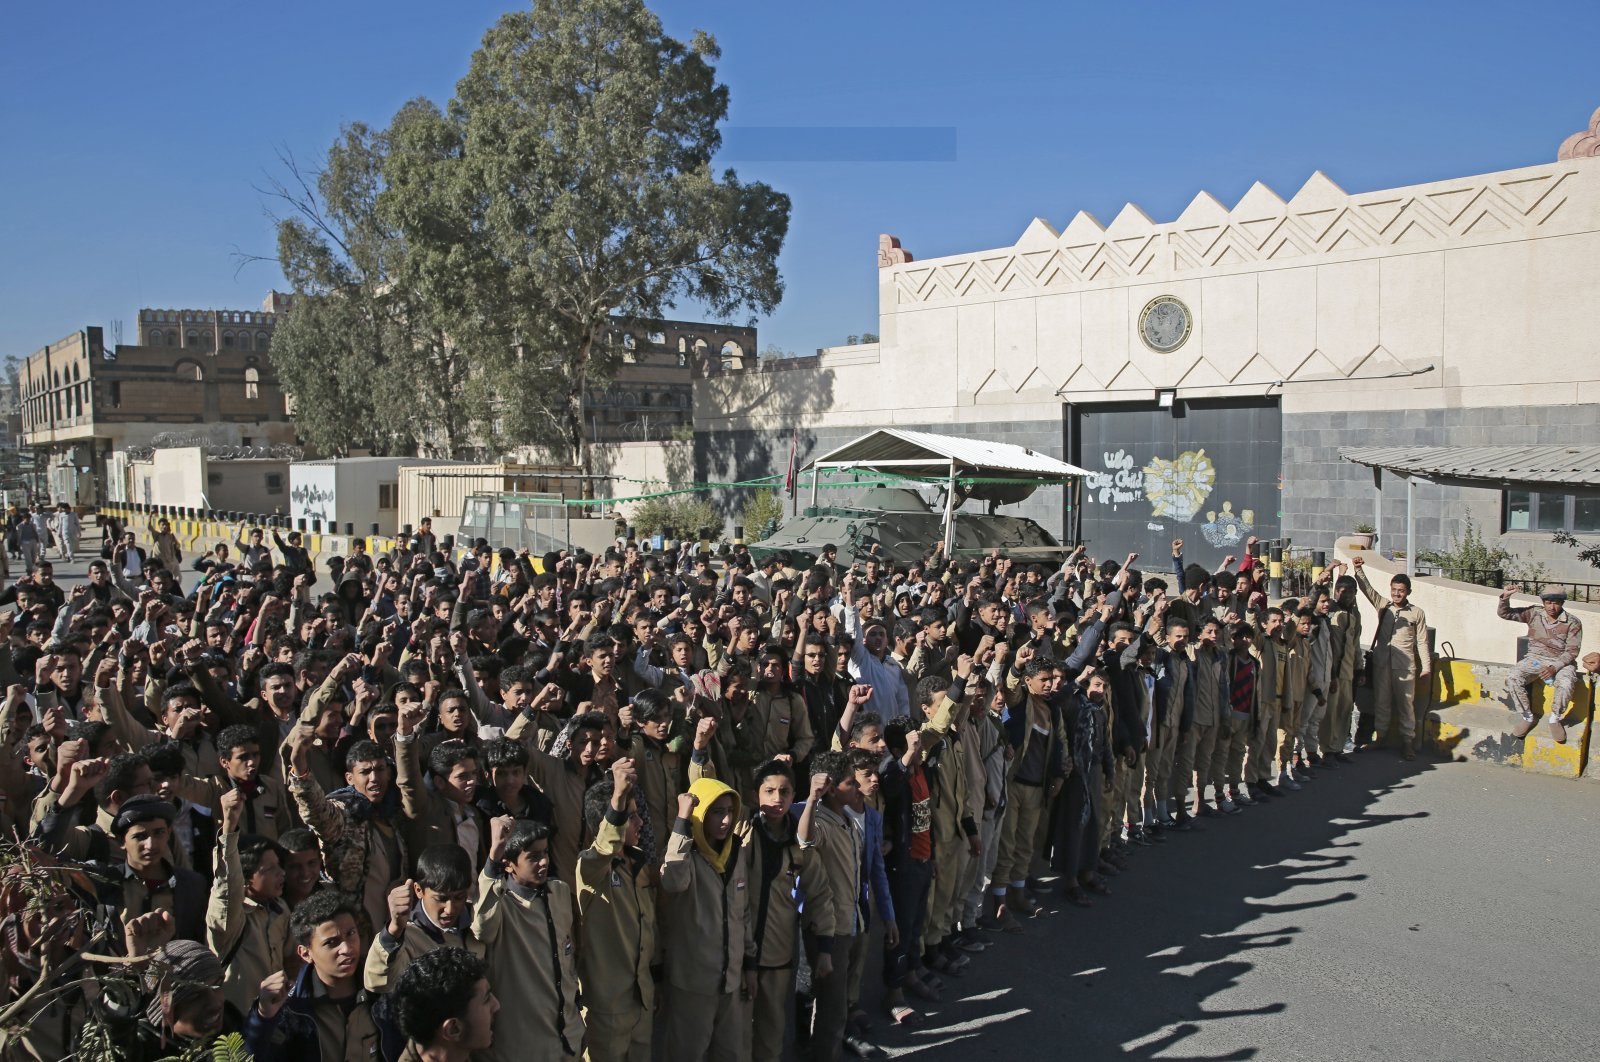 Houthi supporters chant slogans during a demonstration outside the closed U.S. Embassy over its decision to designate the Houthis a foreign terrorist organization, in Sanaa, Yemen, Jan. 18, 2021. (AP Photo)